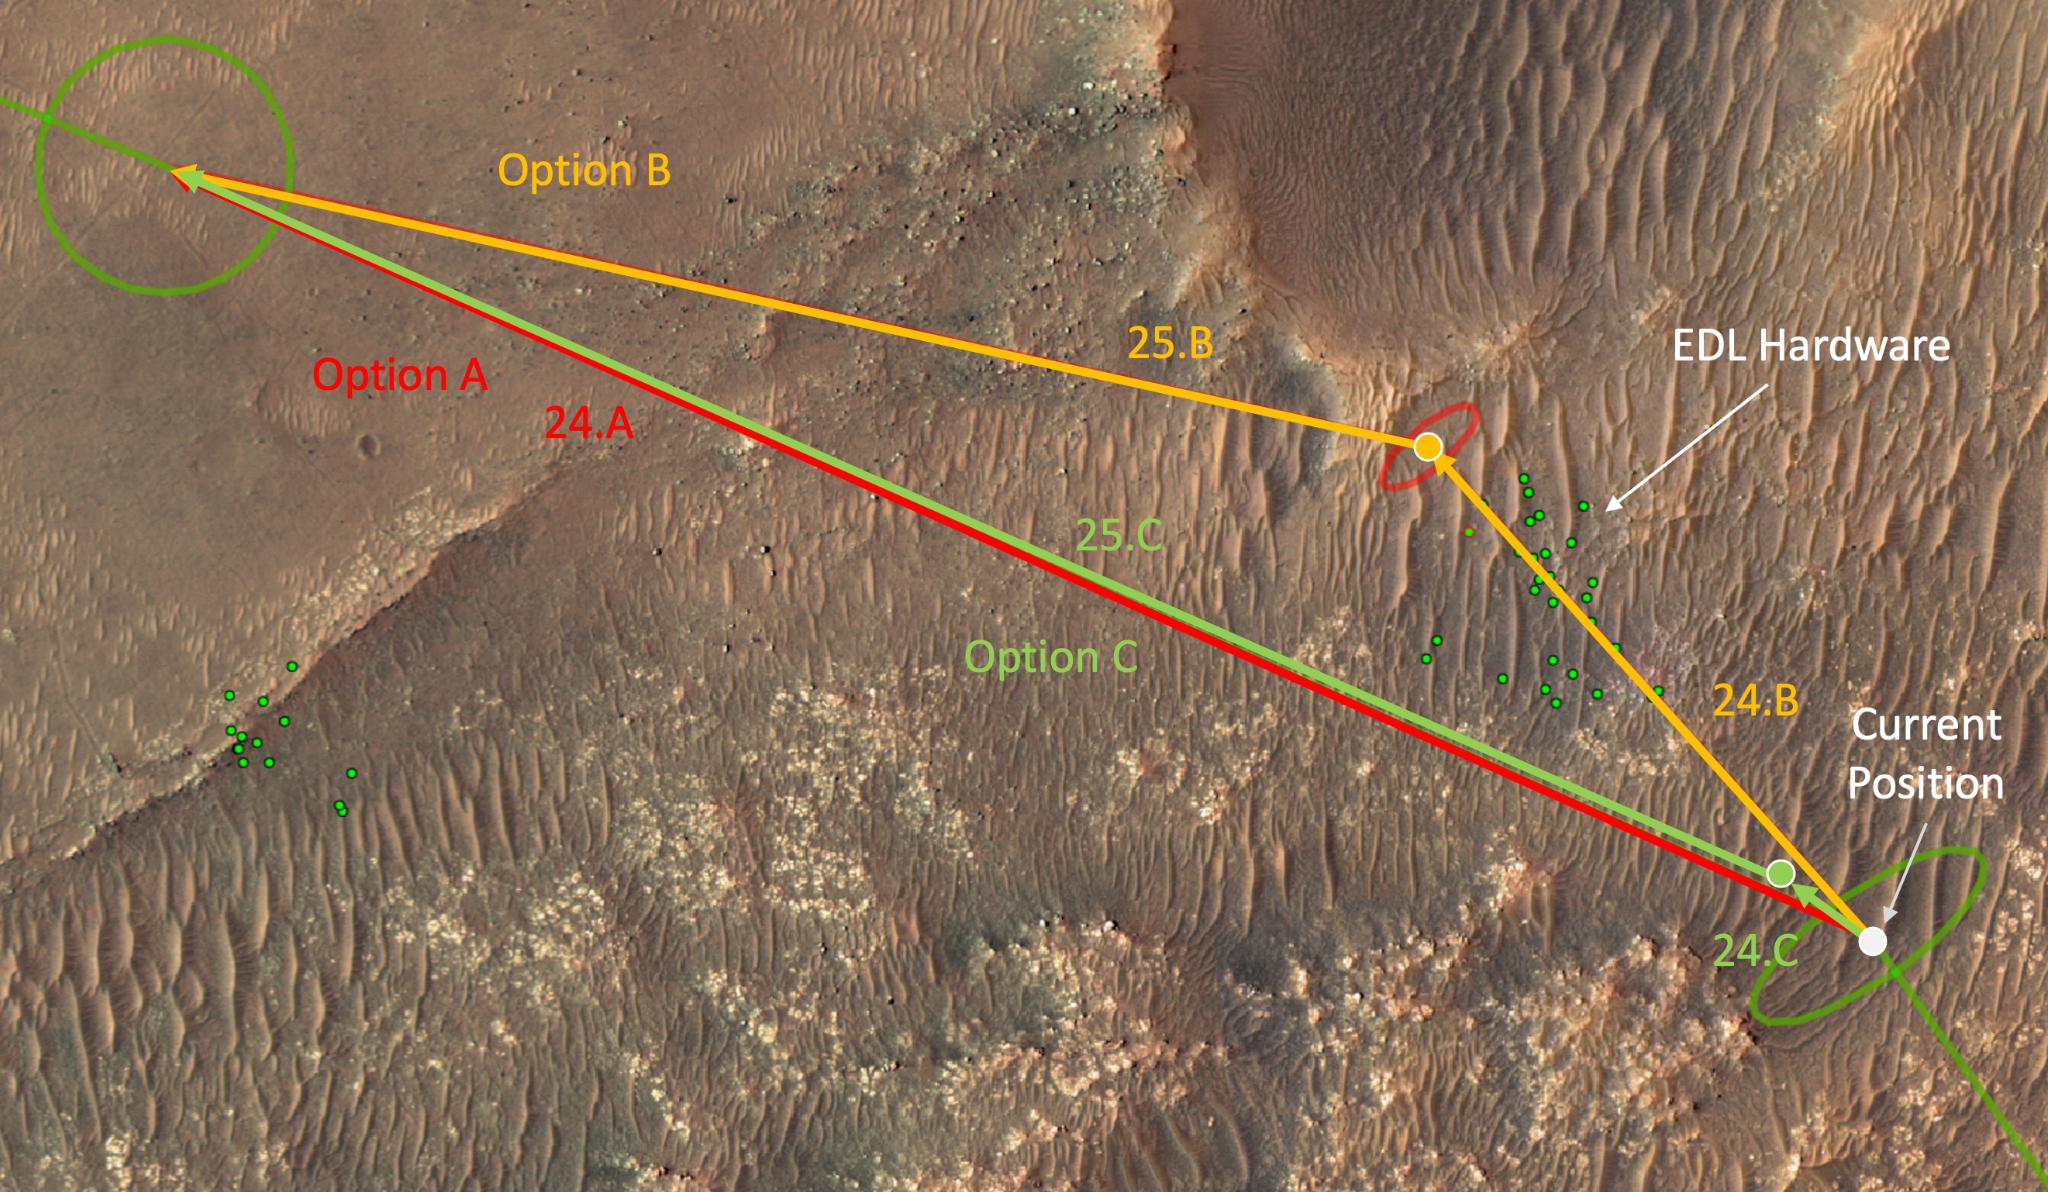 This annotated overhead image from the HiRISE camera aboard NASAs Mars Reconnaissance Orbiter (MRO) depicts three options for the agencys Mars Ingenuity Helicopter to take on flights out of the Séítah region.